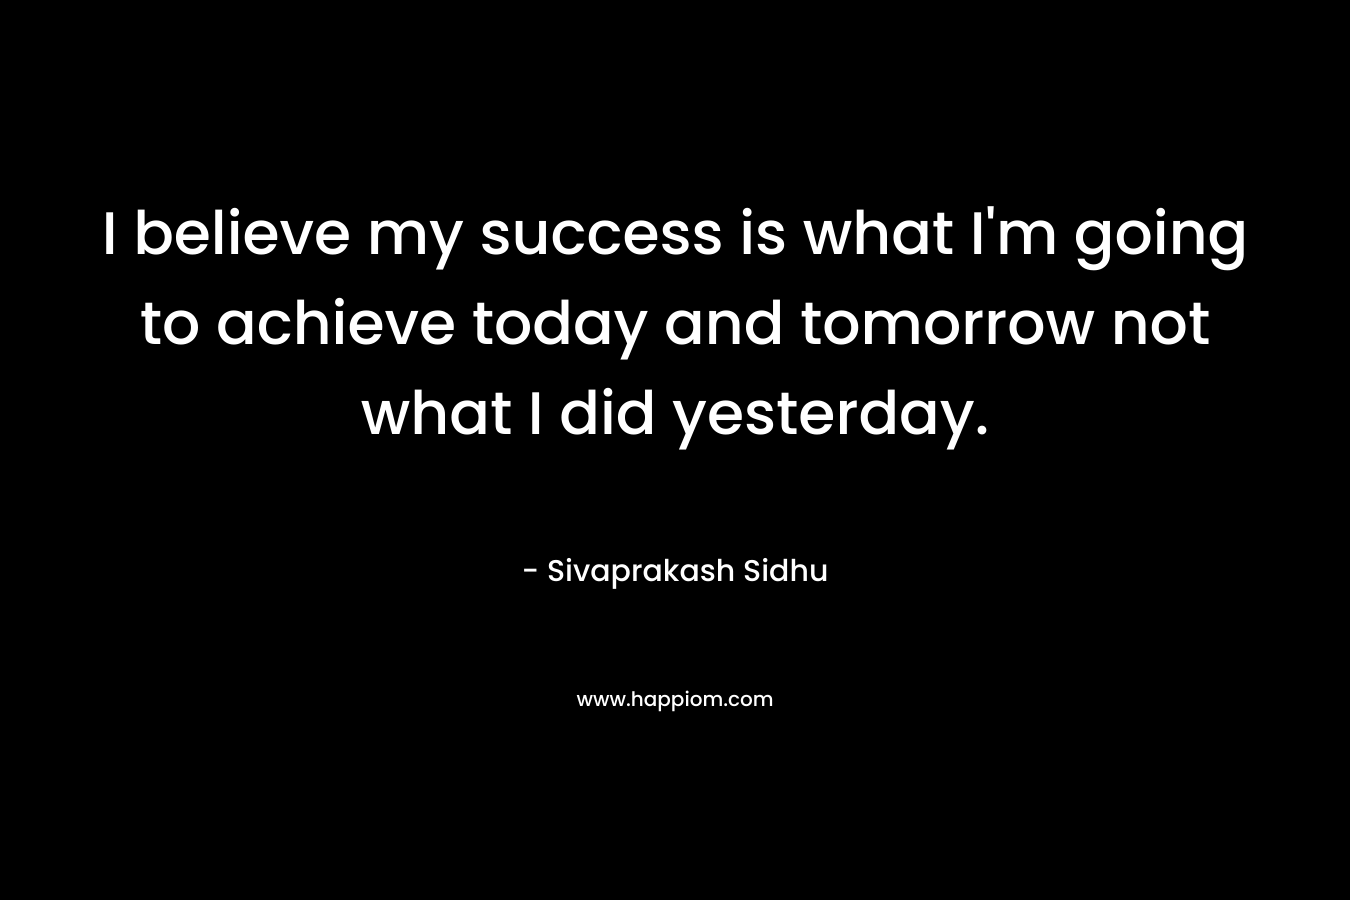 I believe my success is what I'm going to achieve today and tomorrow not what I did yesterday.